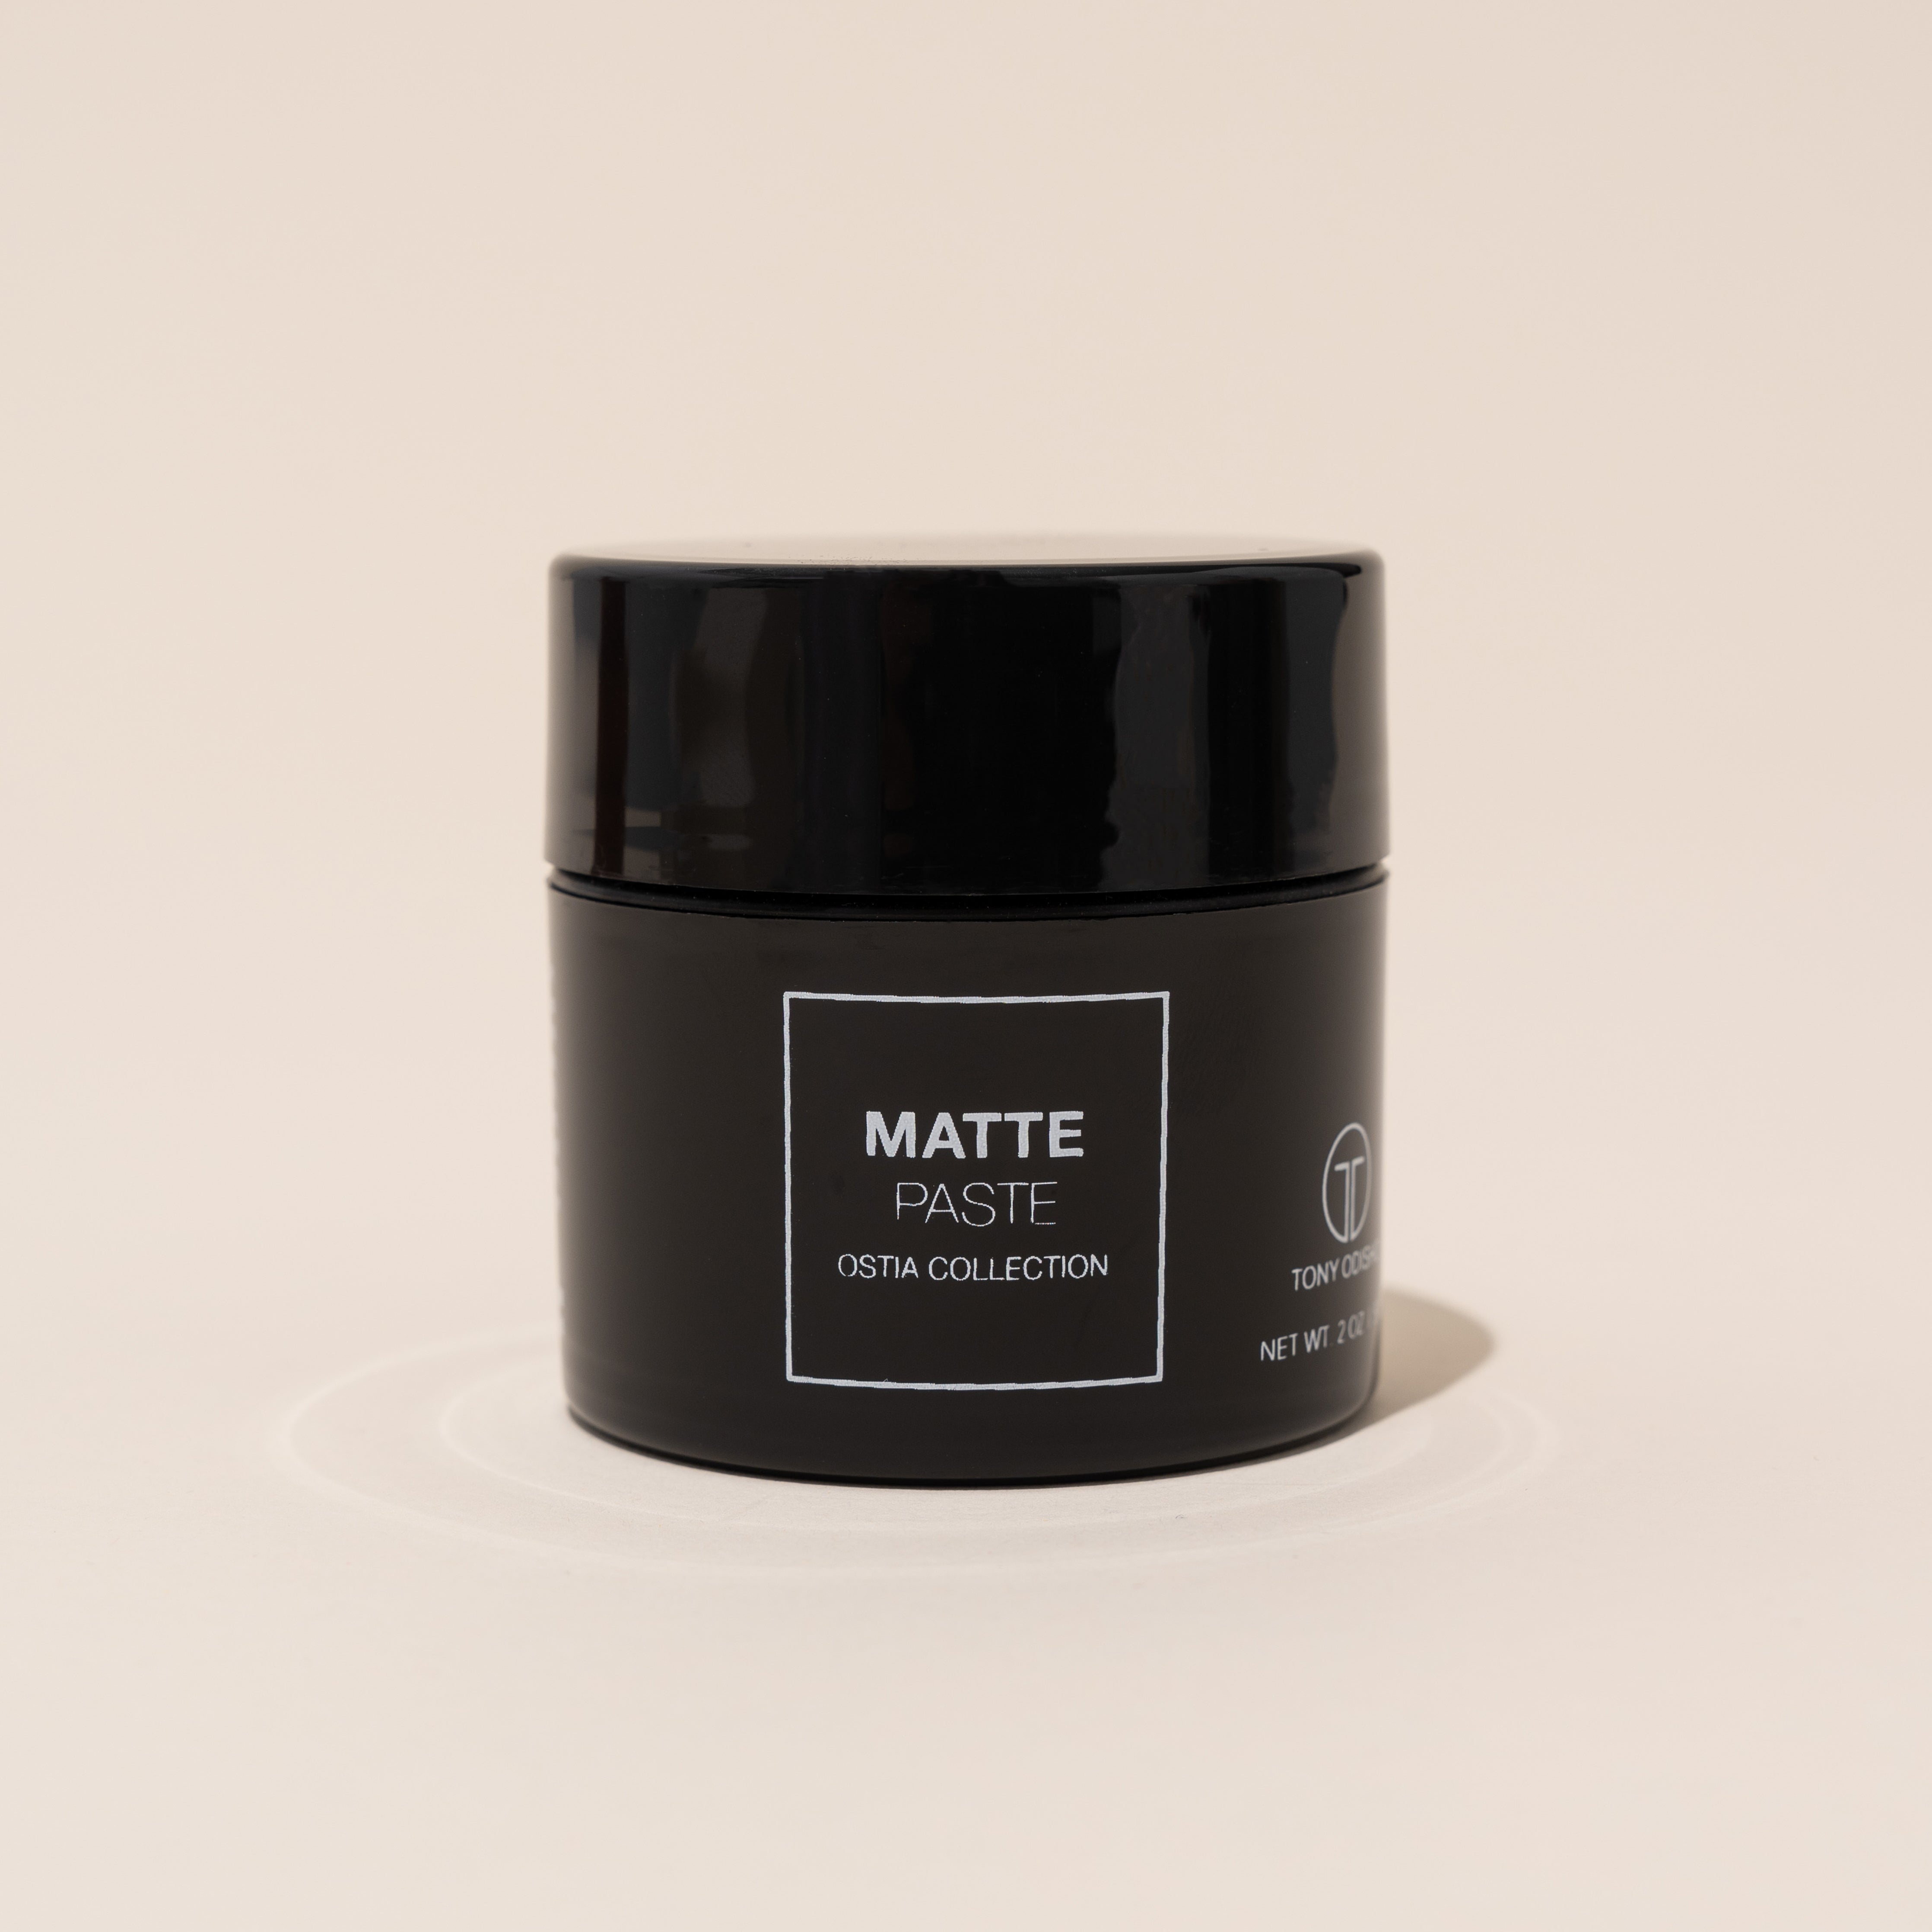 Ostia Collection Matte Paste 2oz | Gives the hair a natural matte finish - Image 1